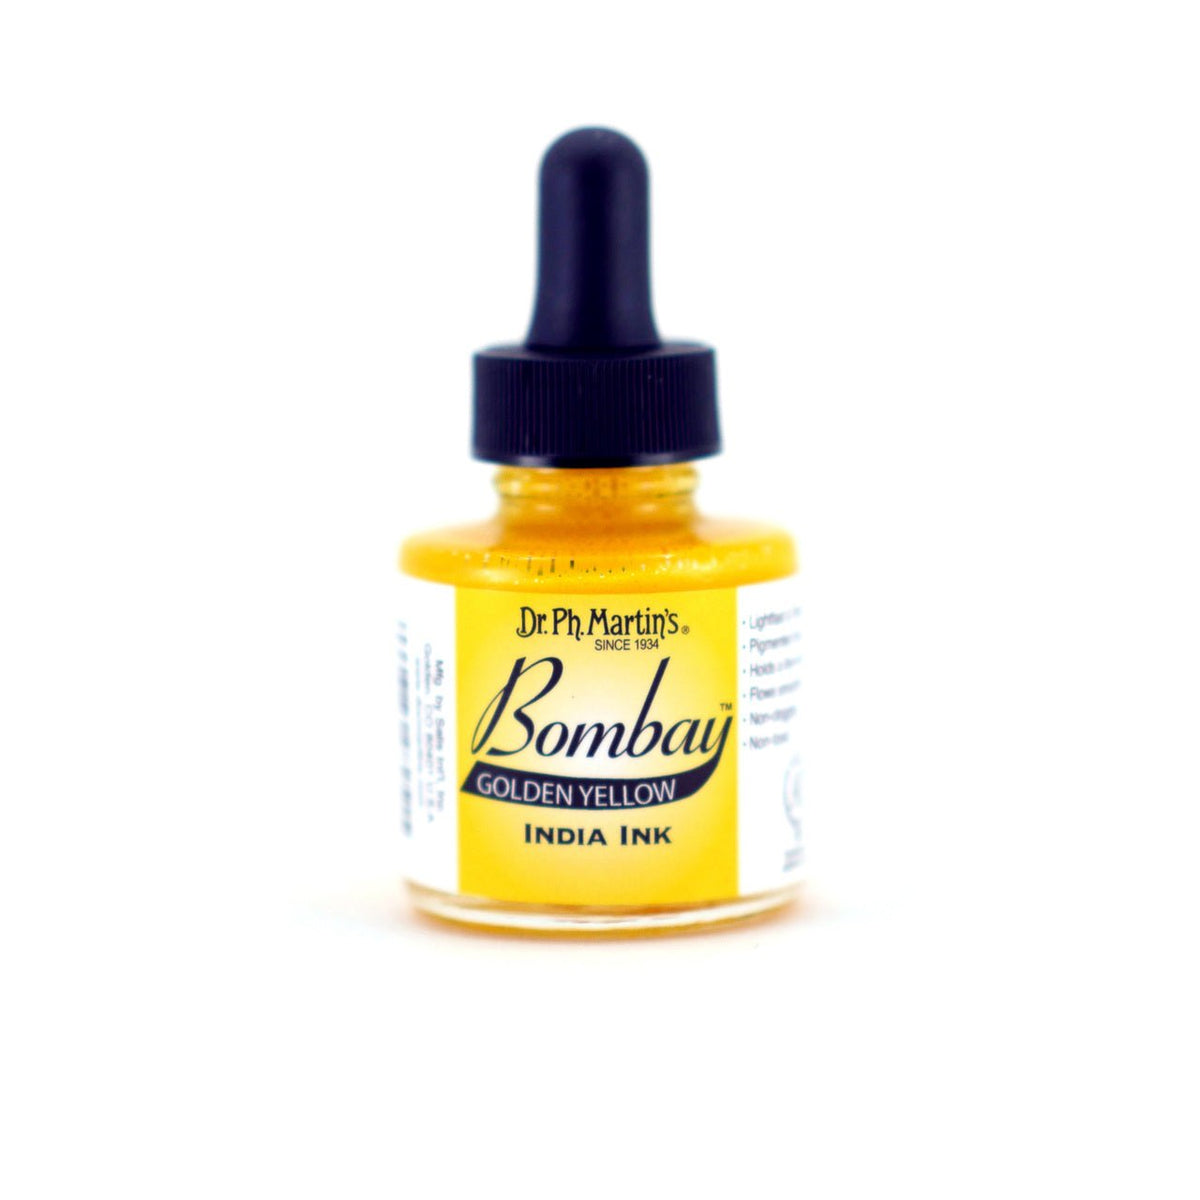 Dr. P.H. Martin Bombay India Ink 1oz - Golden Yellow - merriartist.com